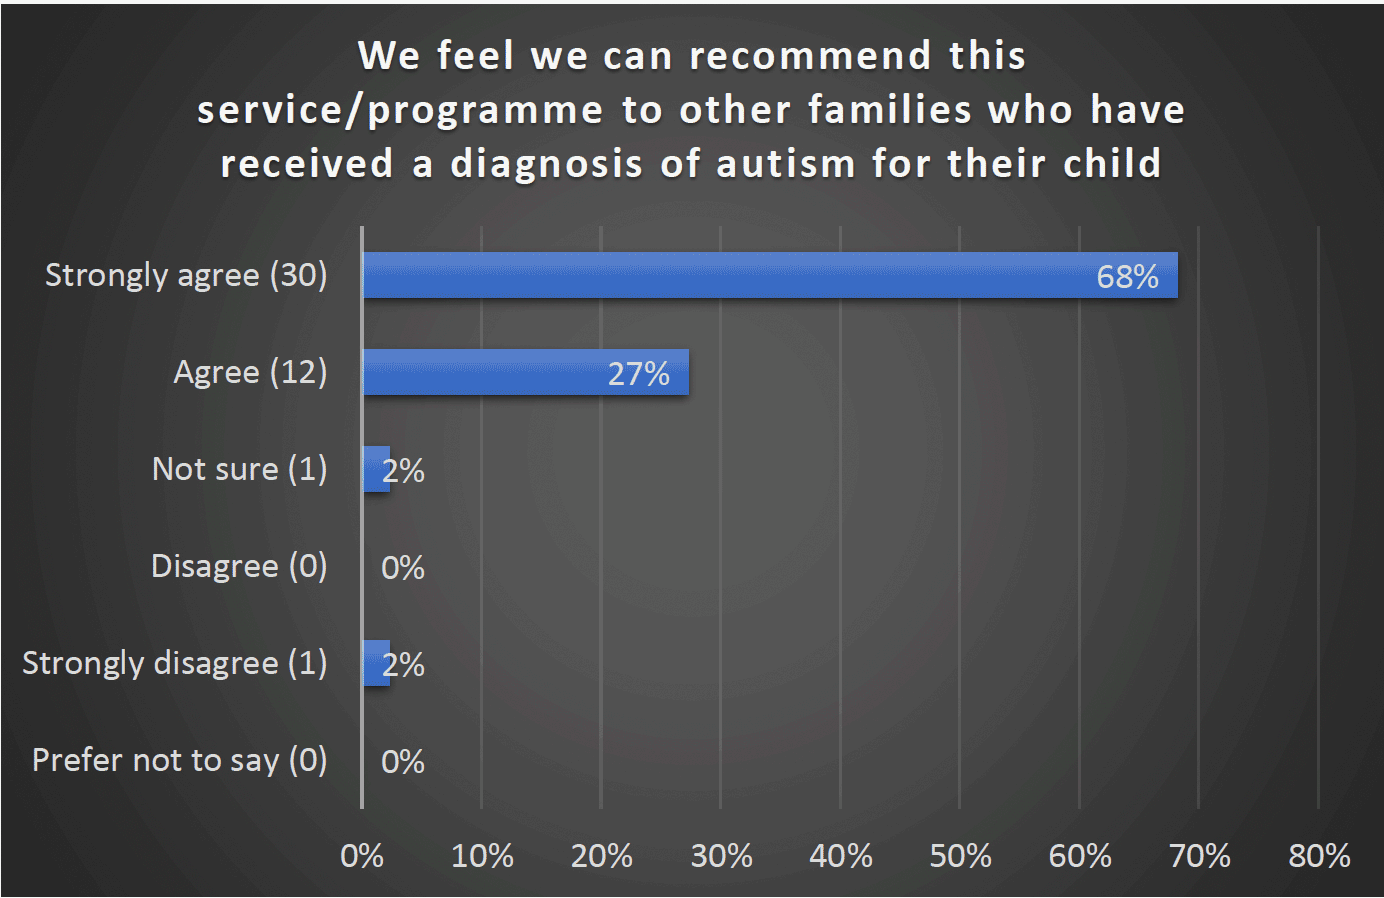 We feel we can recommend this service/programme to other families who have received a diagnosis of autism for their child - Strongly agree (30) 68%, Agree (12) 27%, Not sure (1) 2%, Disagree 0, Strongly disagree (1) 2%